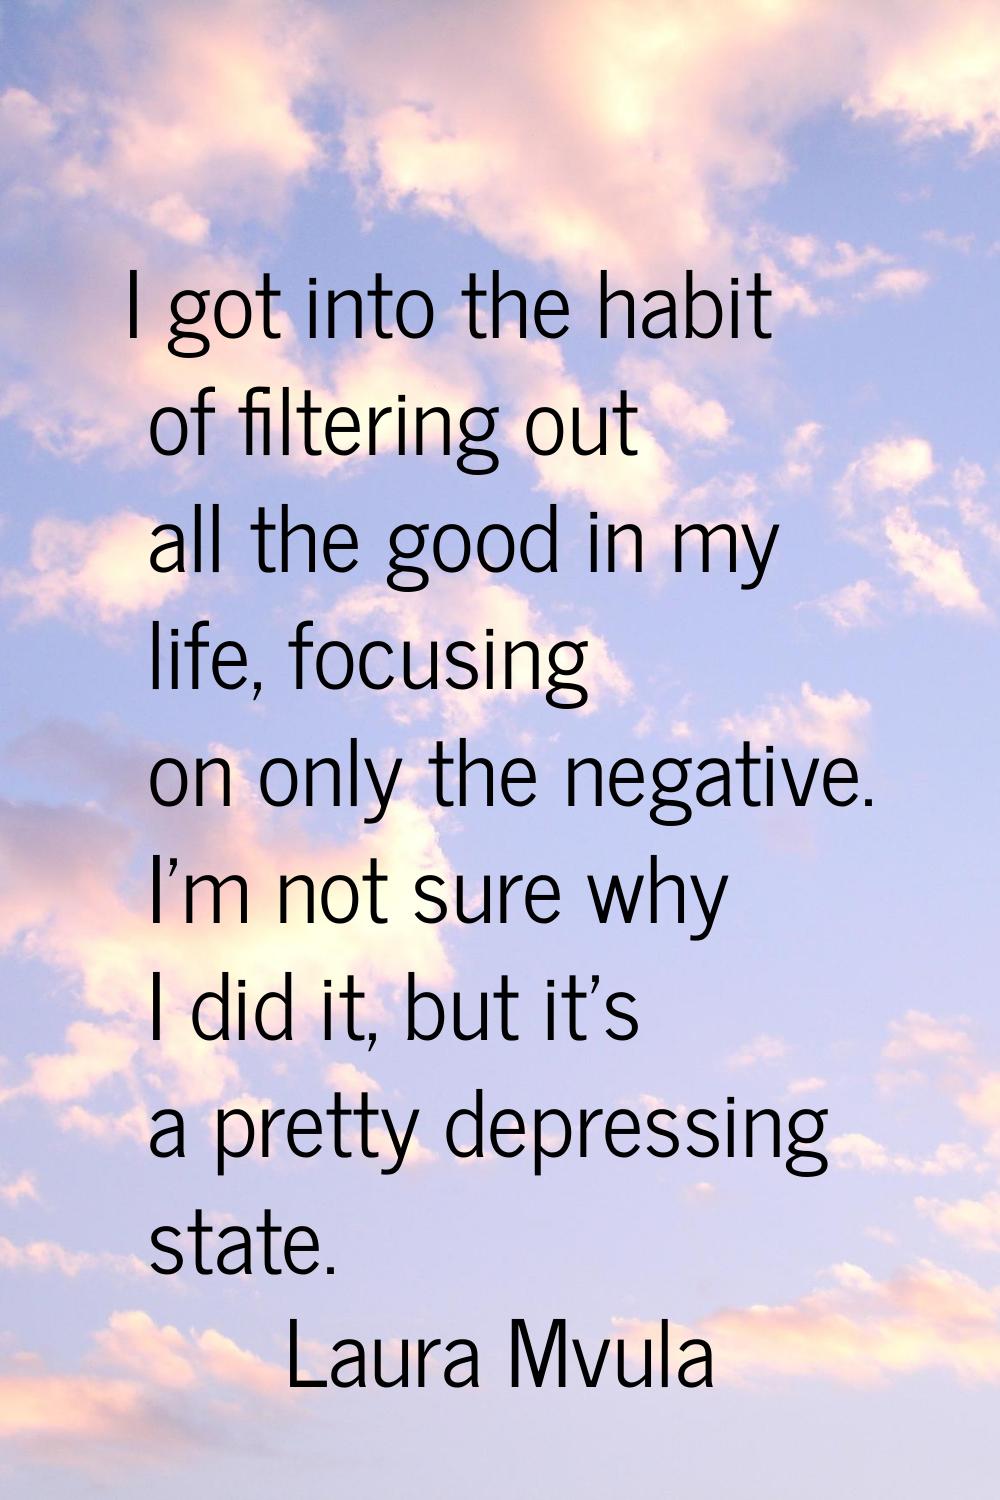 I got into the habit of filtering out all the good in my life, focusing on only the negative. I'm n